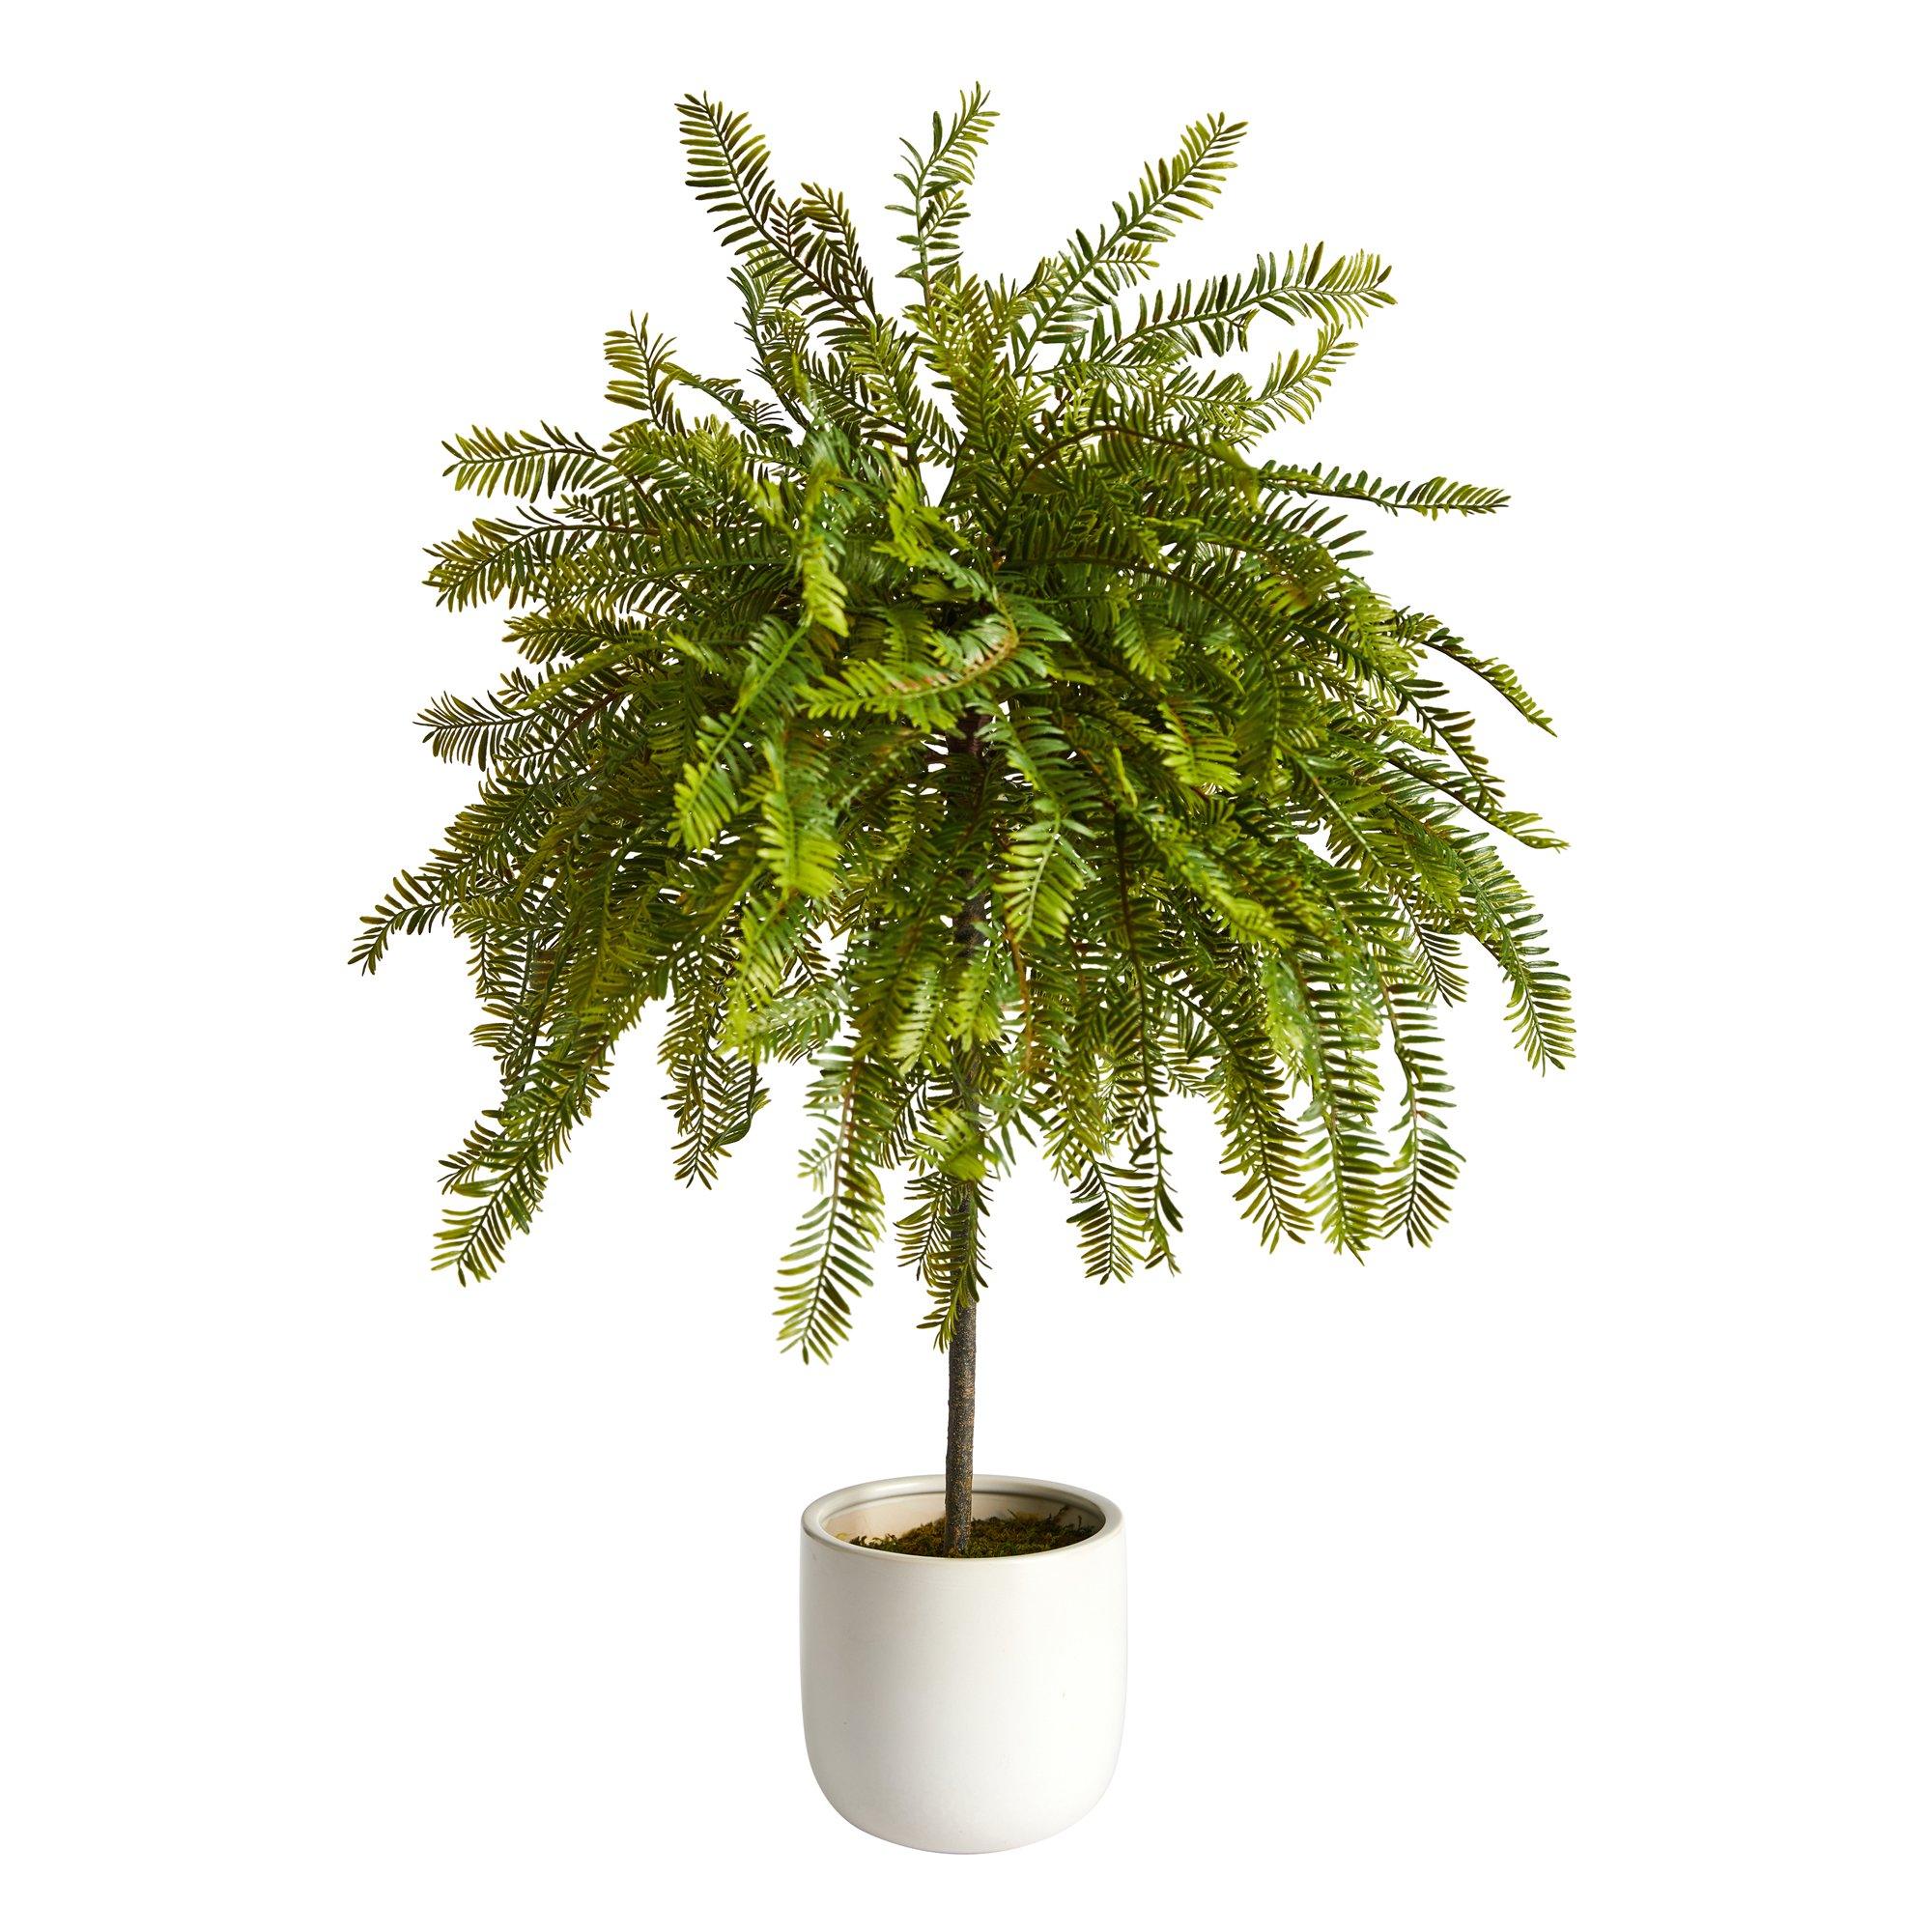 Artificial Tree - 2' Northern Californian Cedar Canopy in Decorative Planter by Nearly Natural